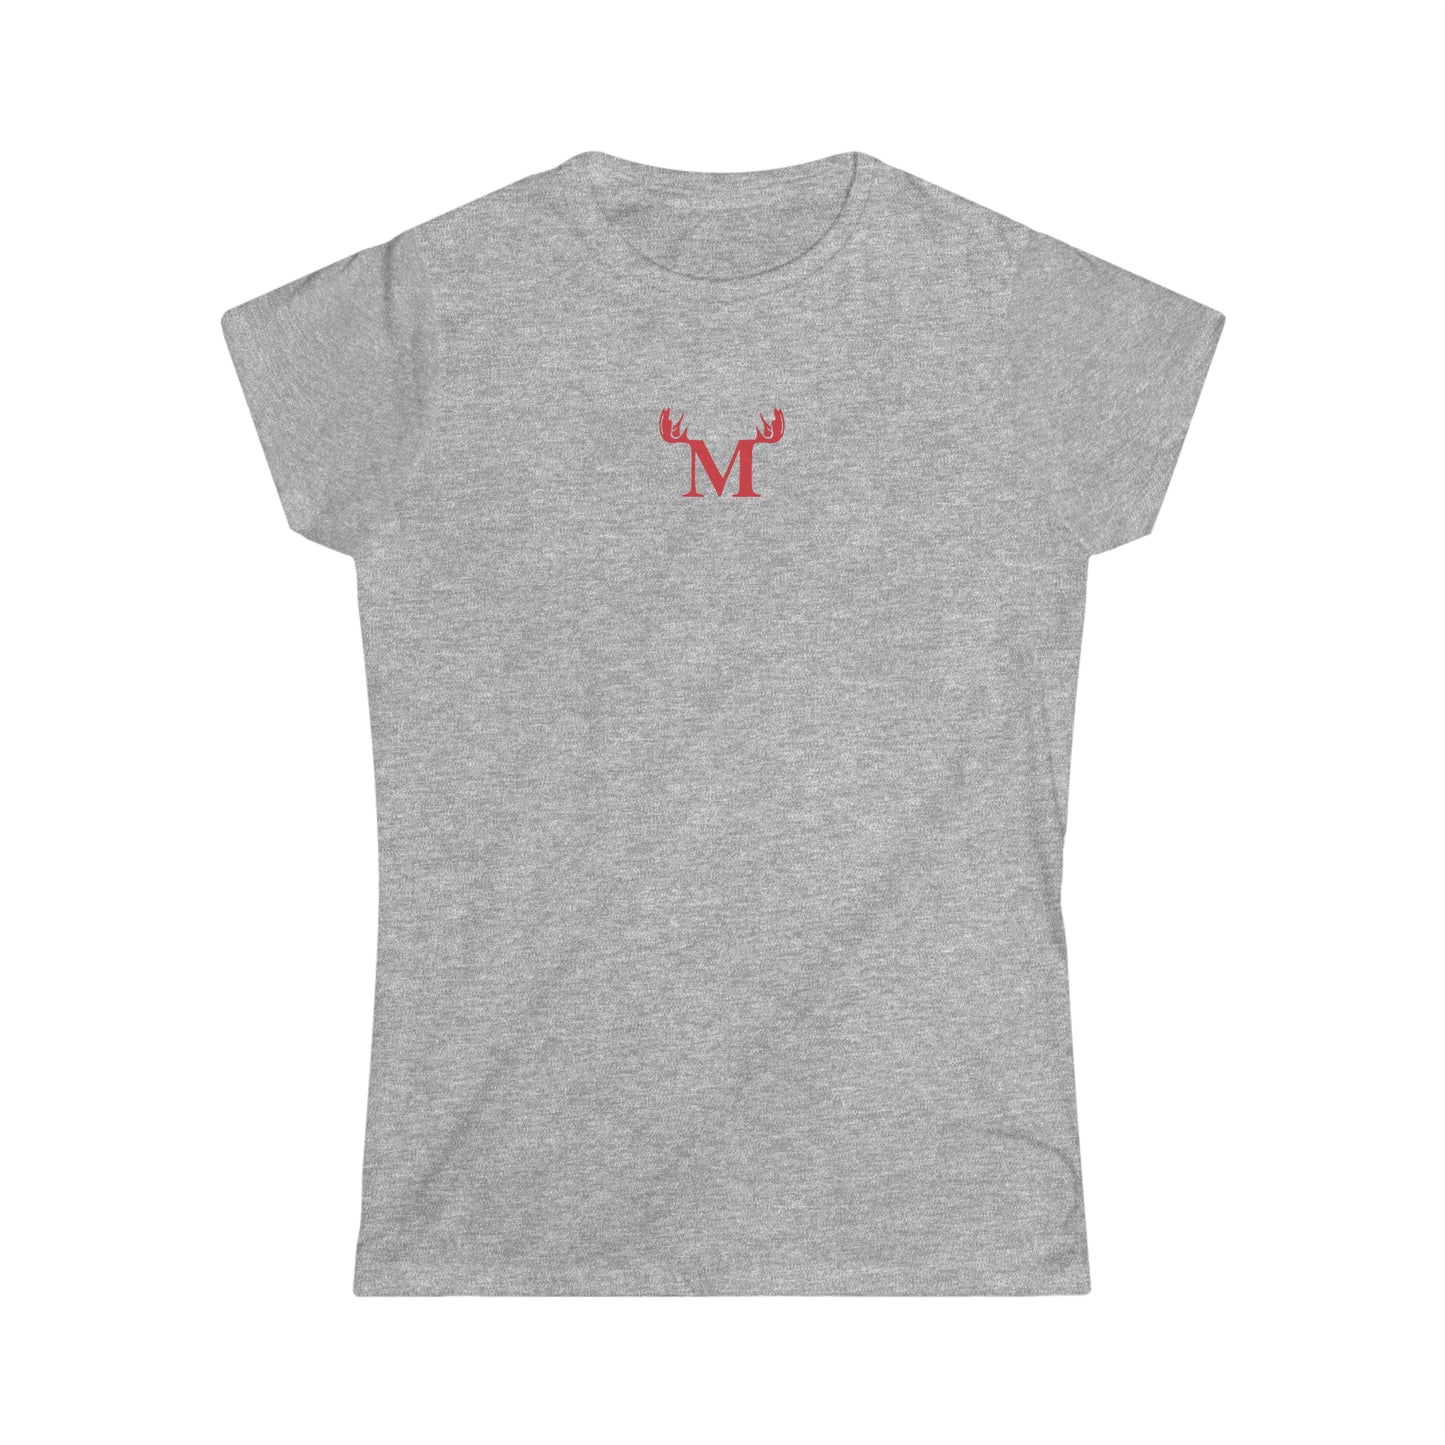 The "M" Ladies Softstyle Tee